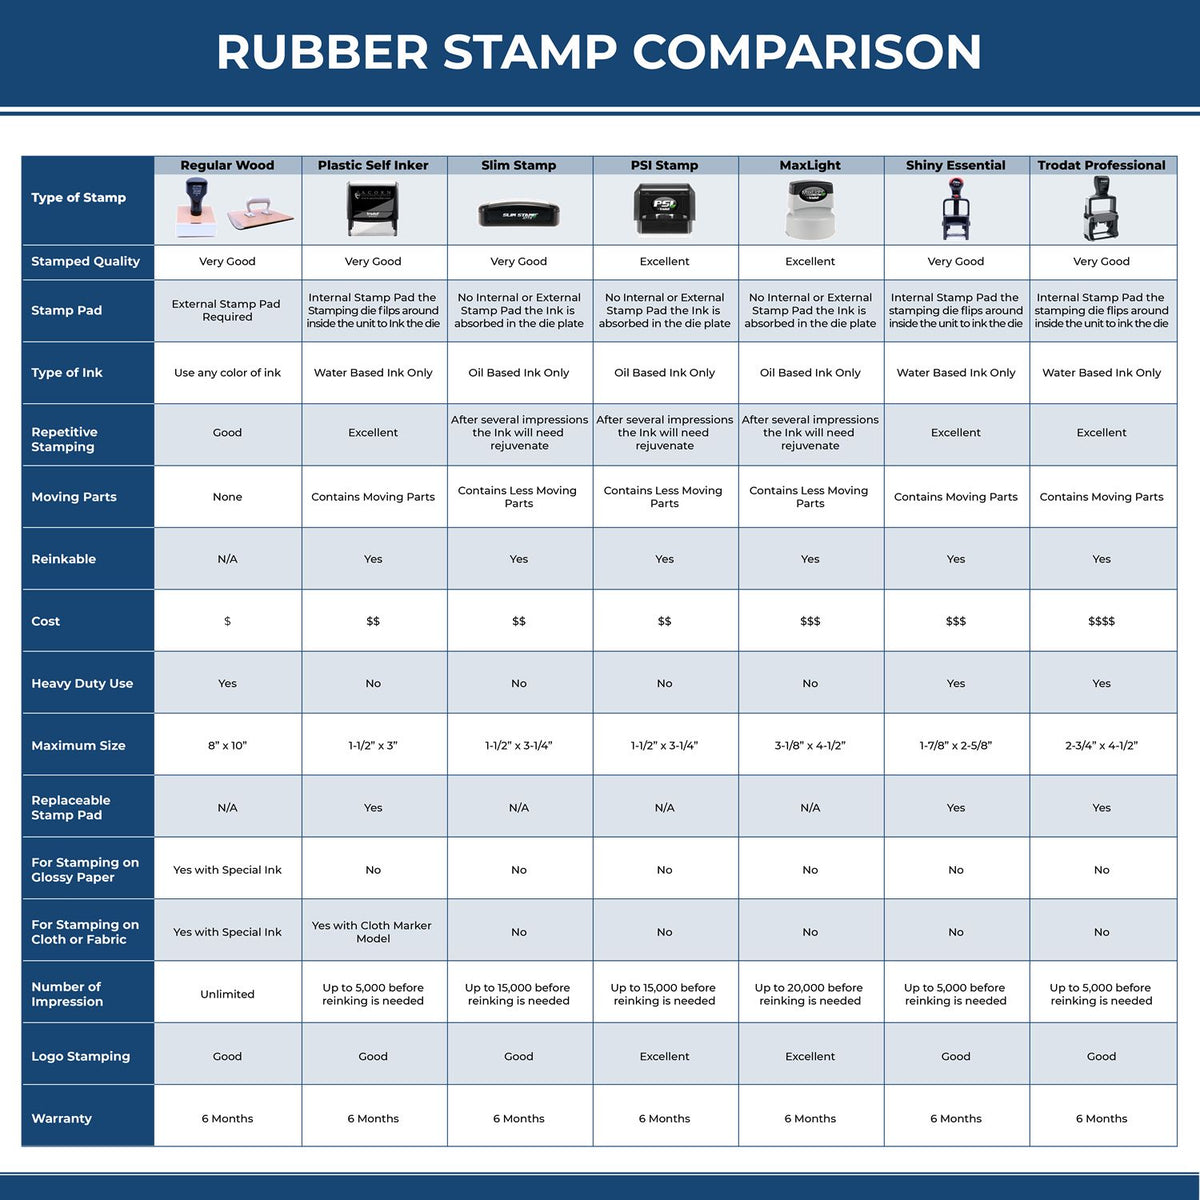 Large Self Inking Of Stamp 4680S Rubber Stamp Comparison